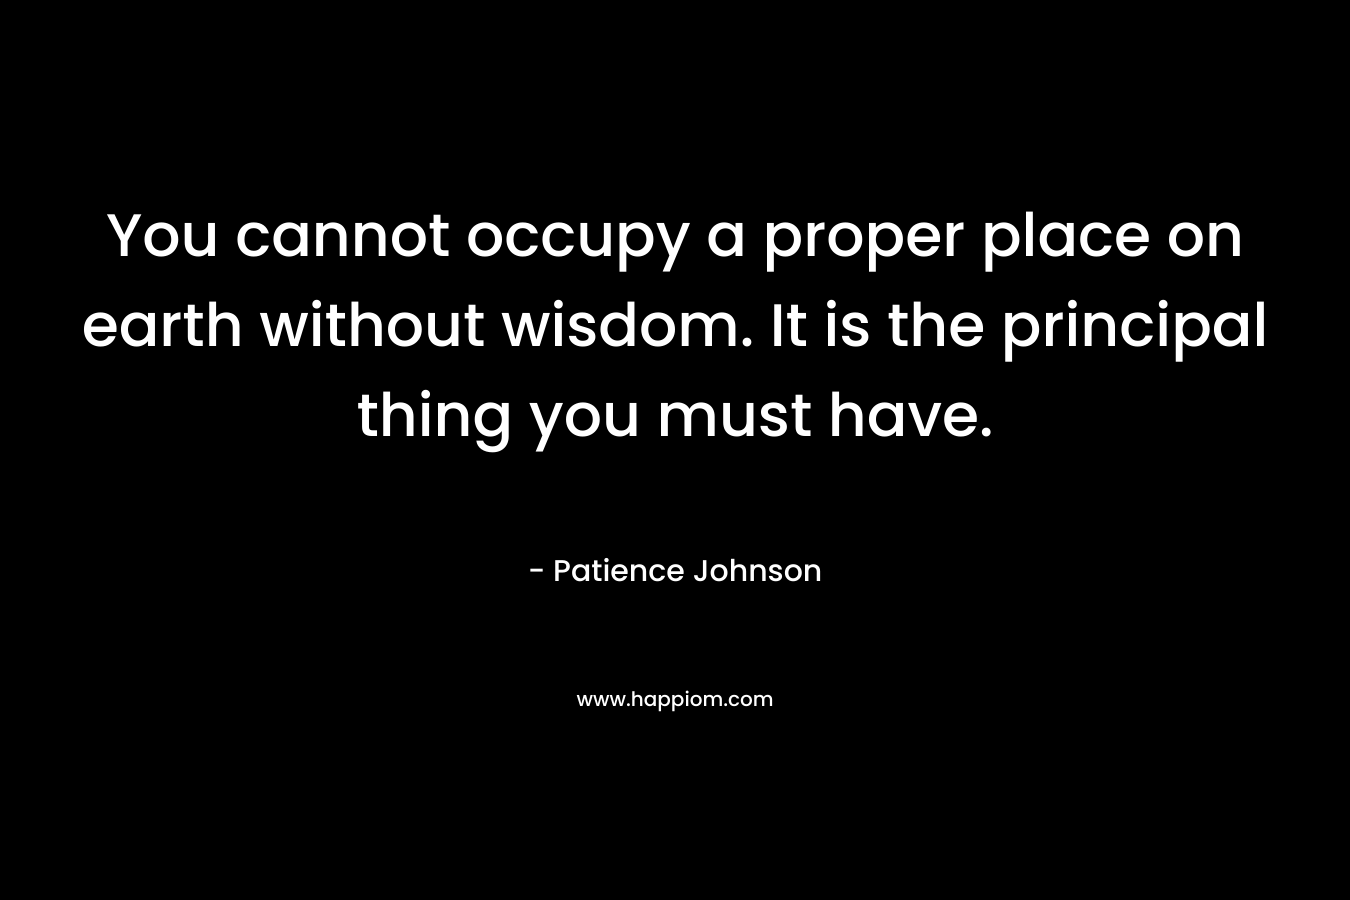 You cannot occupy a proper place on earth without wisdom. It is the principal thing you must have. – Patience Johnson